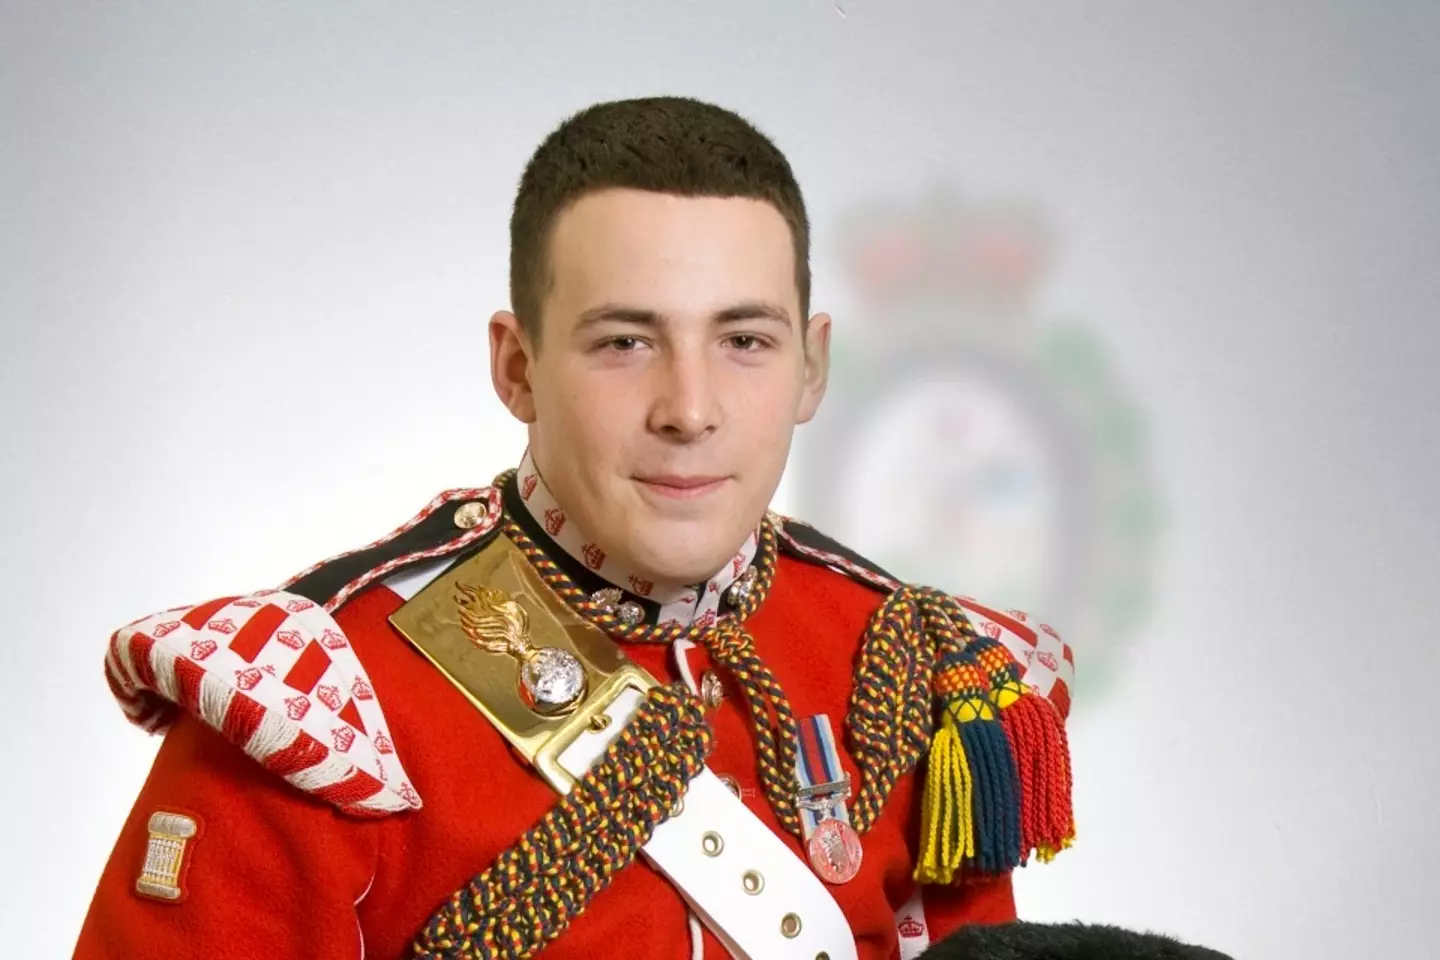 Lee Rigby's son was just two years old when his father was tragically killed.